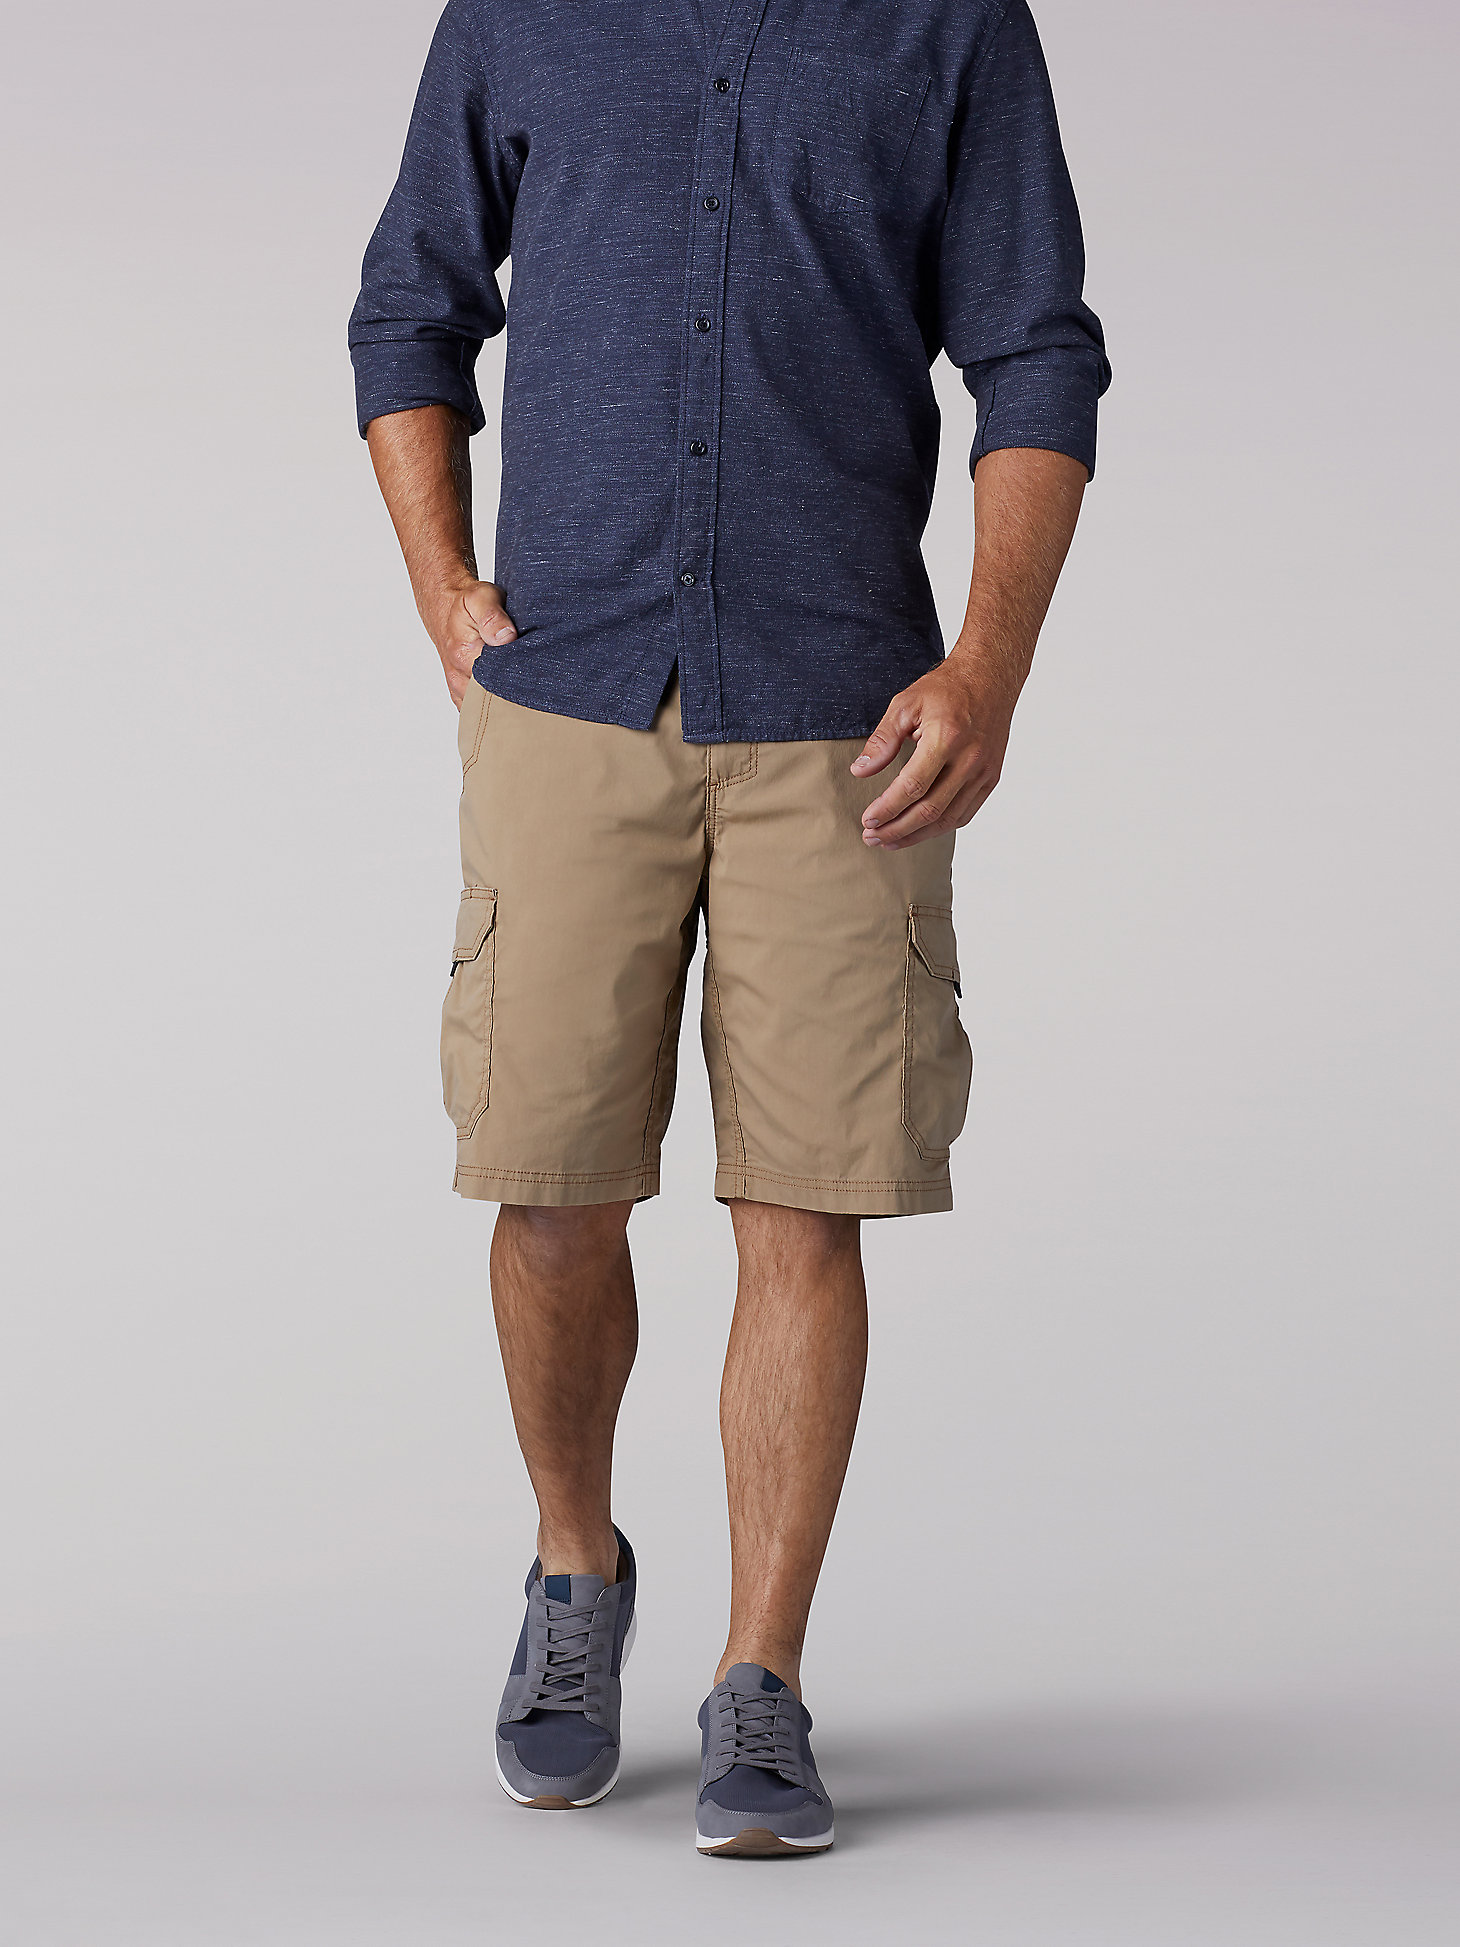 Men’s Extreme Motion Crossroads Shorts in Nomad main view